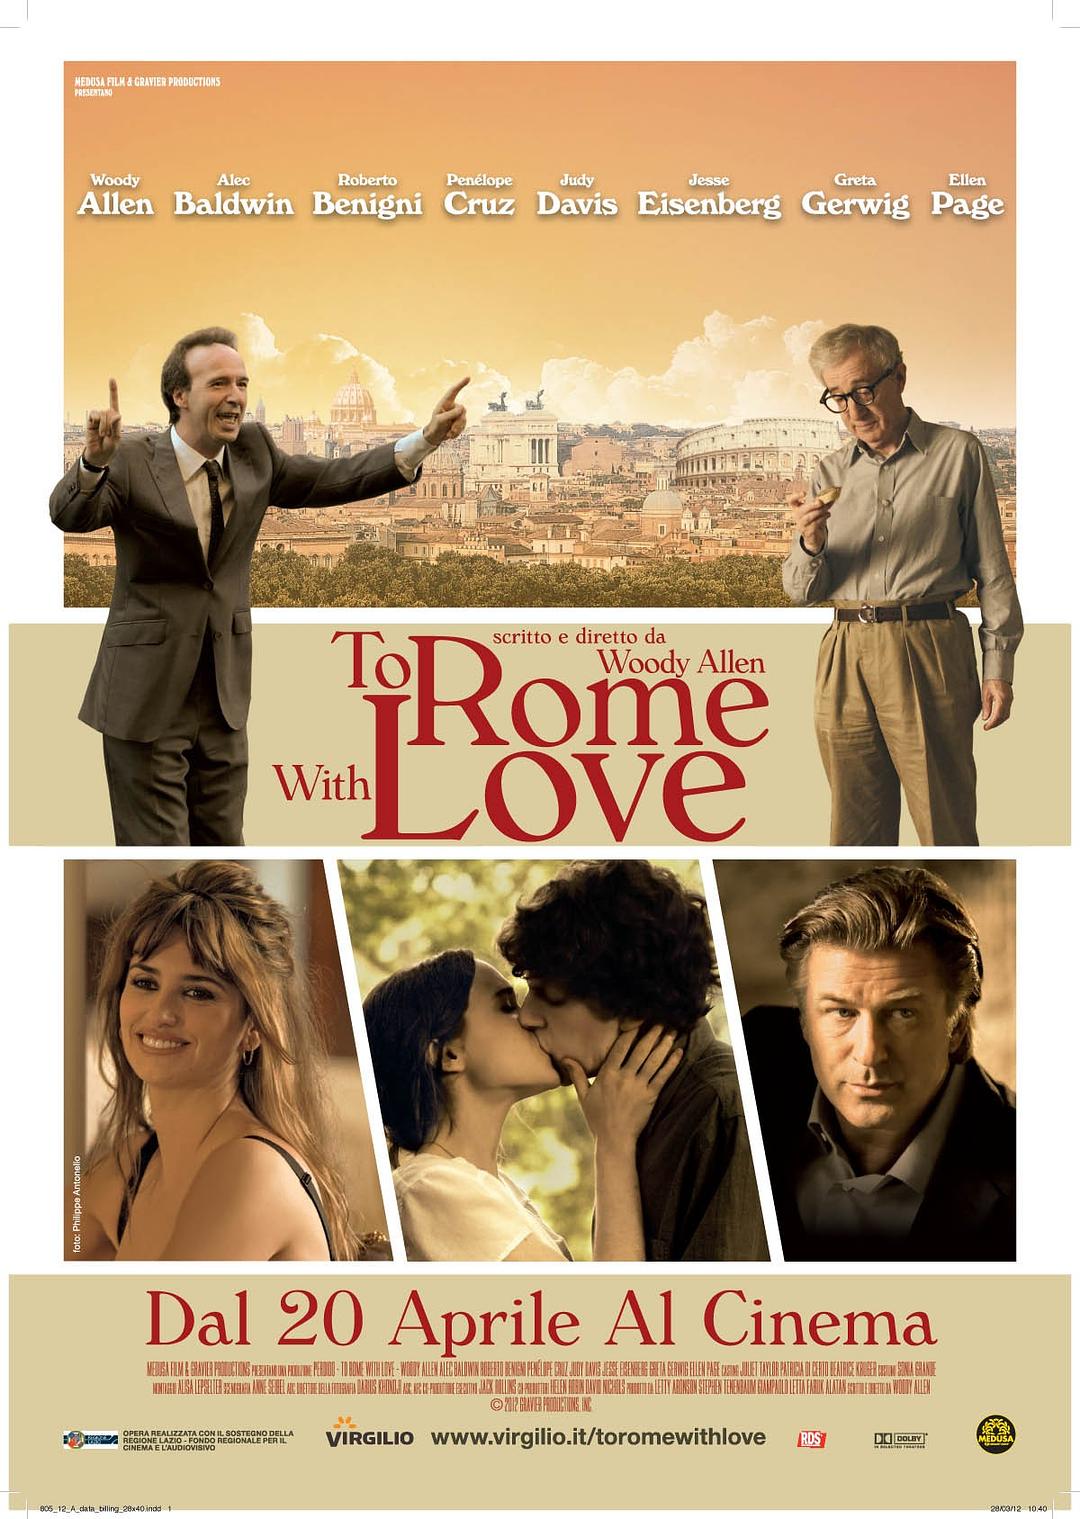  To.Rome.with.Love.2012.1080p.BluRay.x264-PSYCHD 7.94GB-1.png